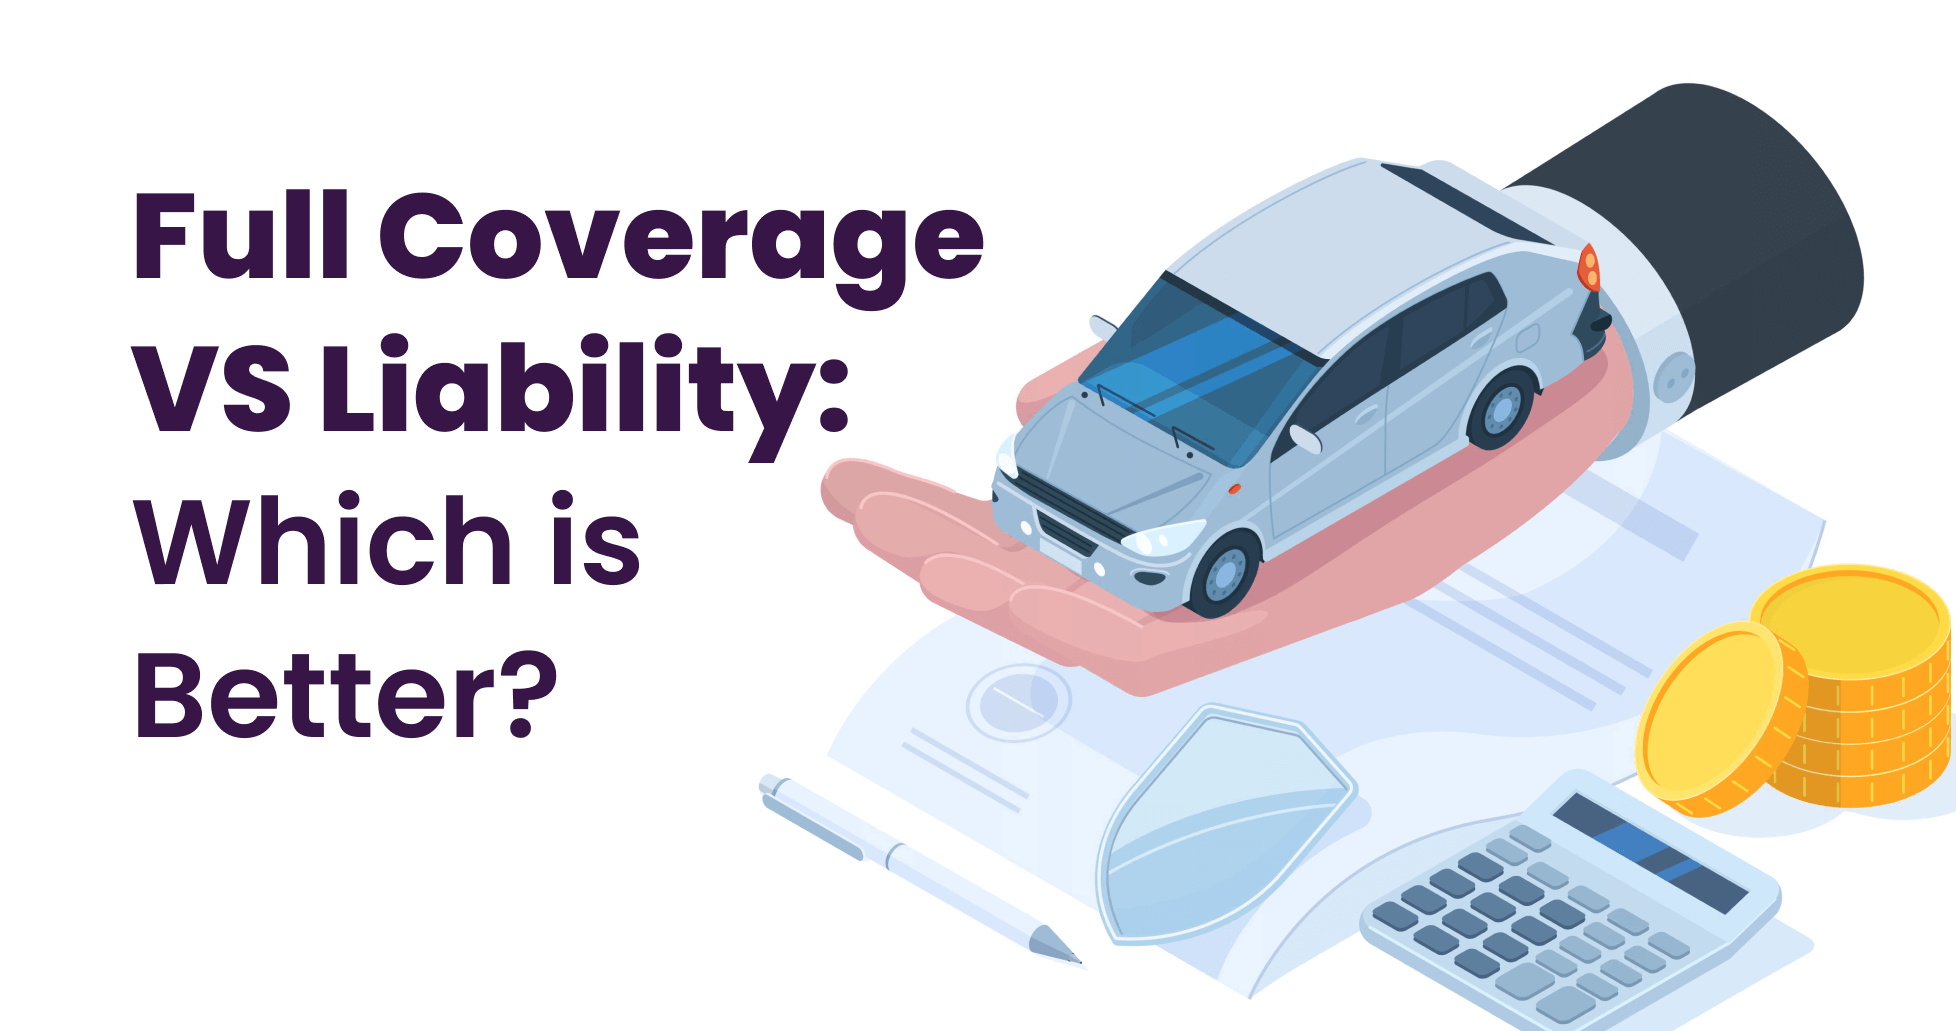 What is the difference between full coverage and liability?